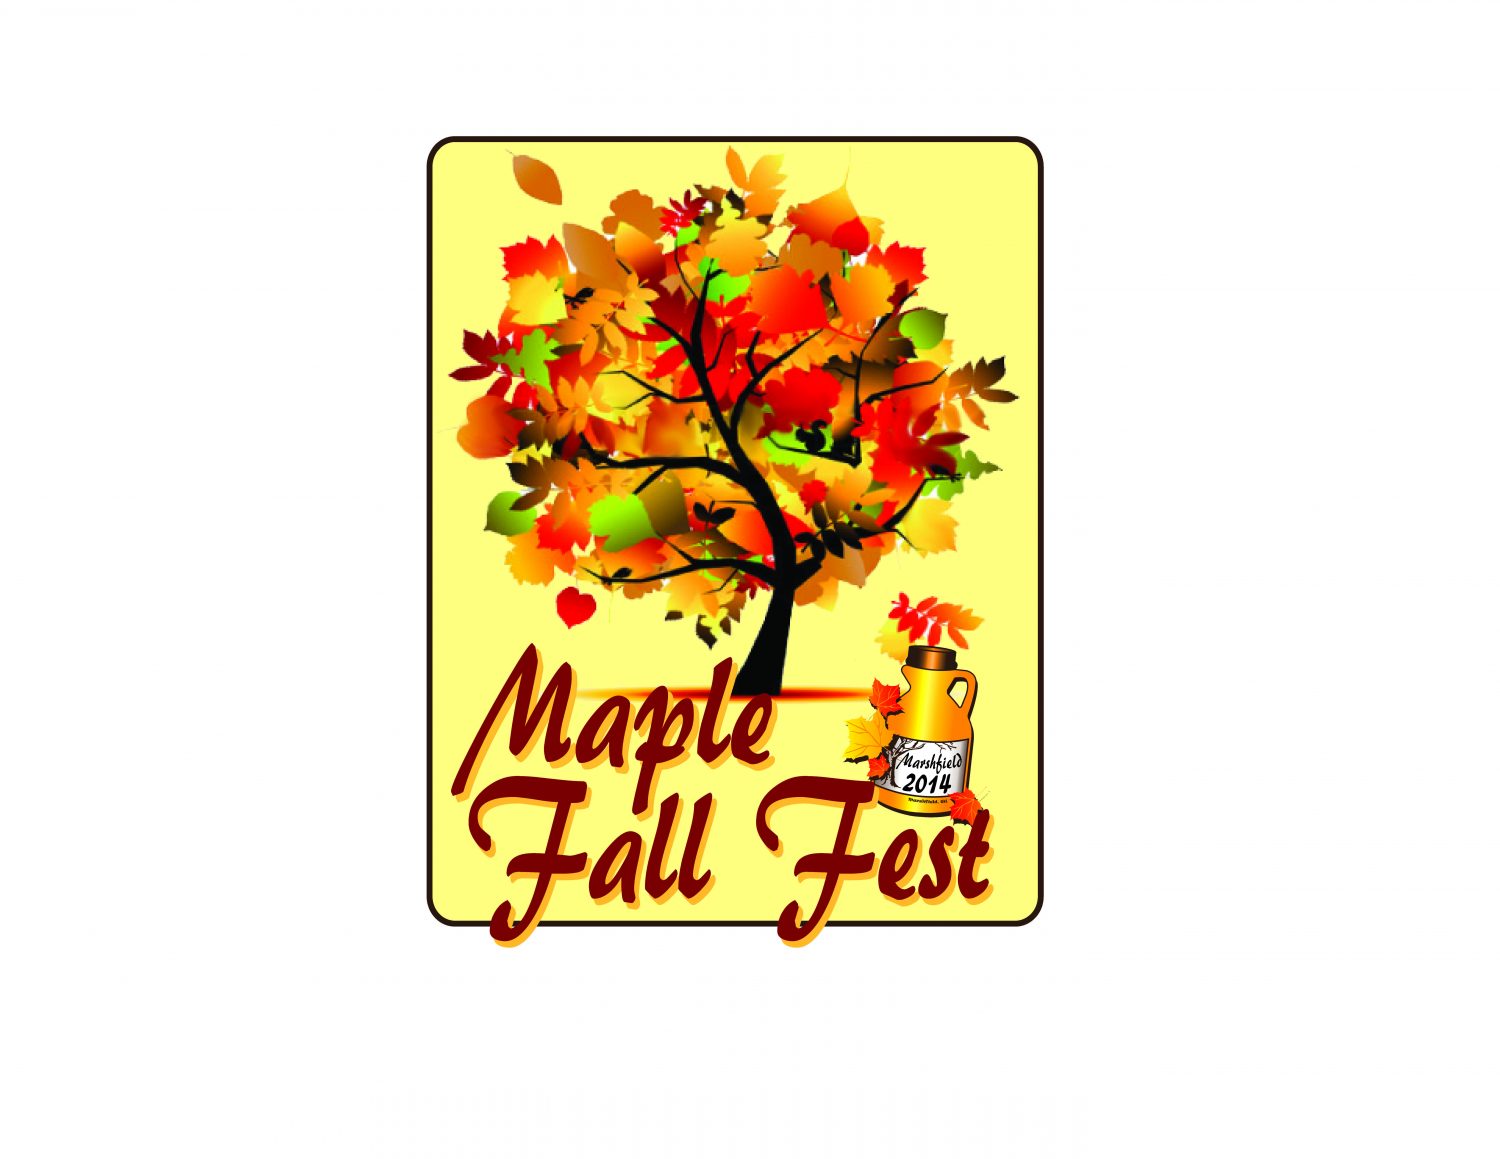 22nd annual Maple Fall Fest to bring family fun to Marshfield Hub